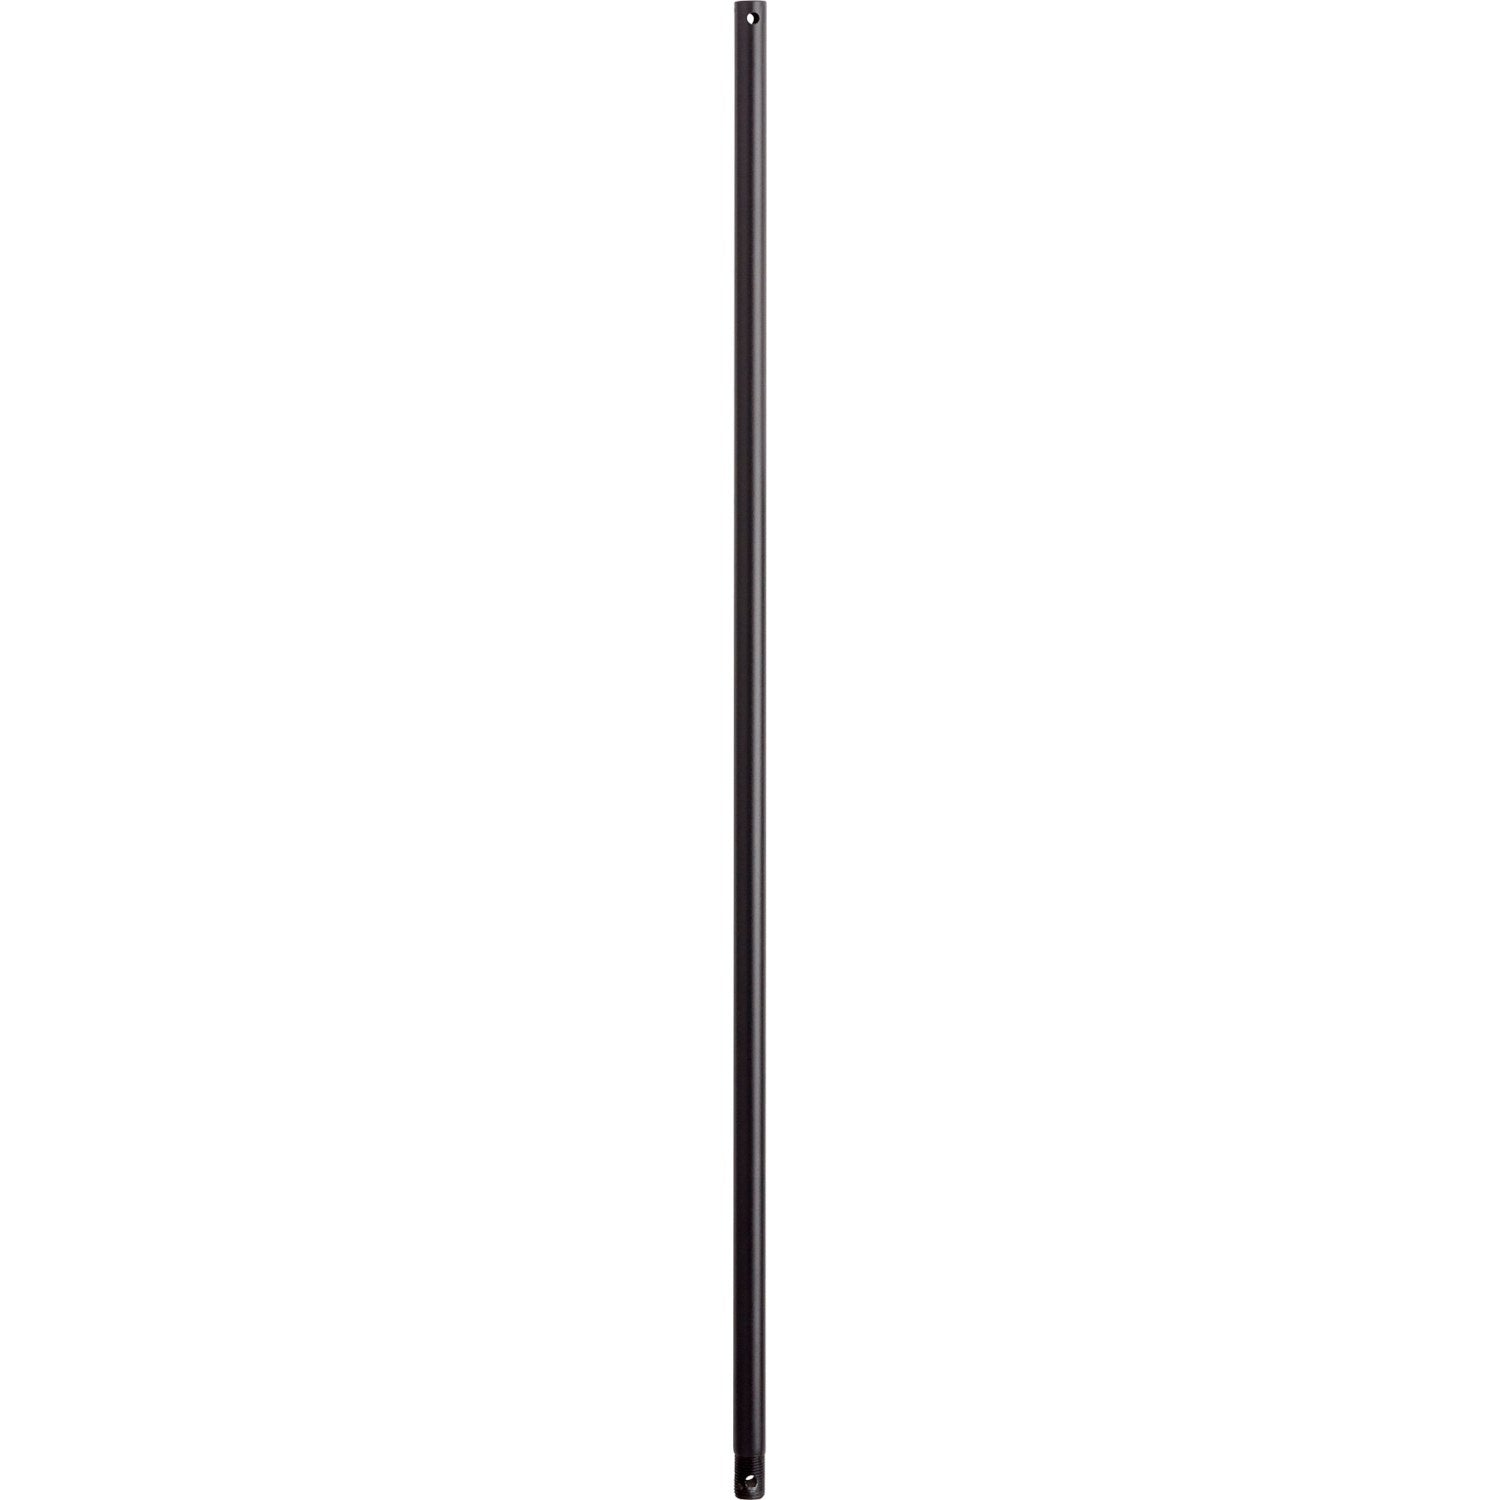 Quorum - 6-6069 - Downrod - 60 in. Downrods - Textured Black